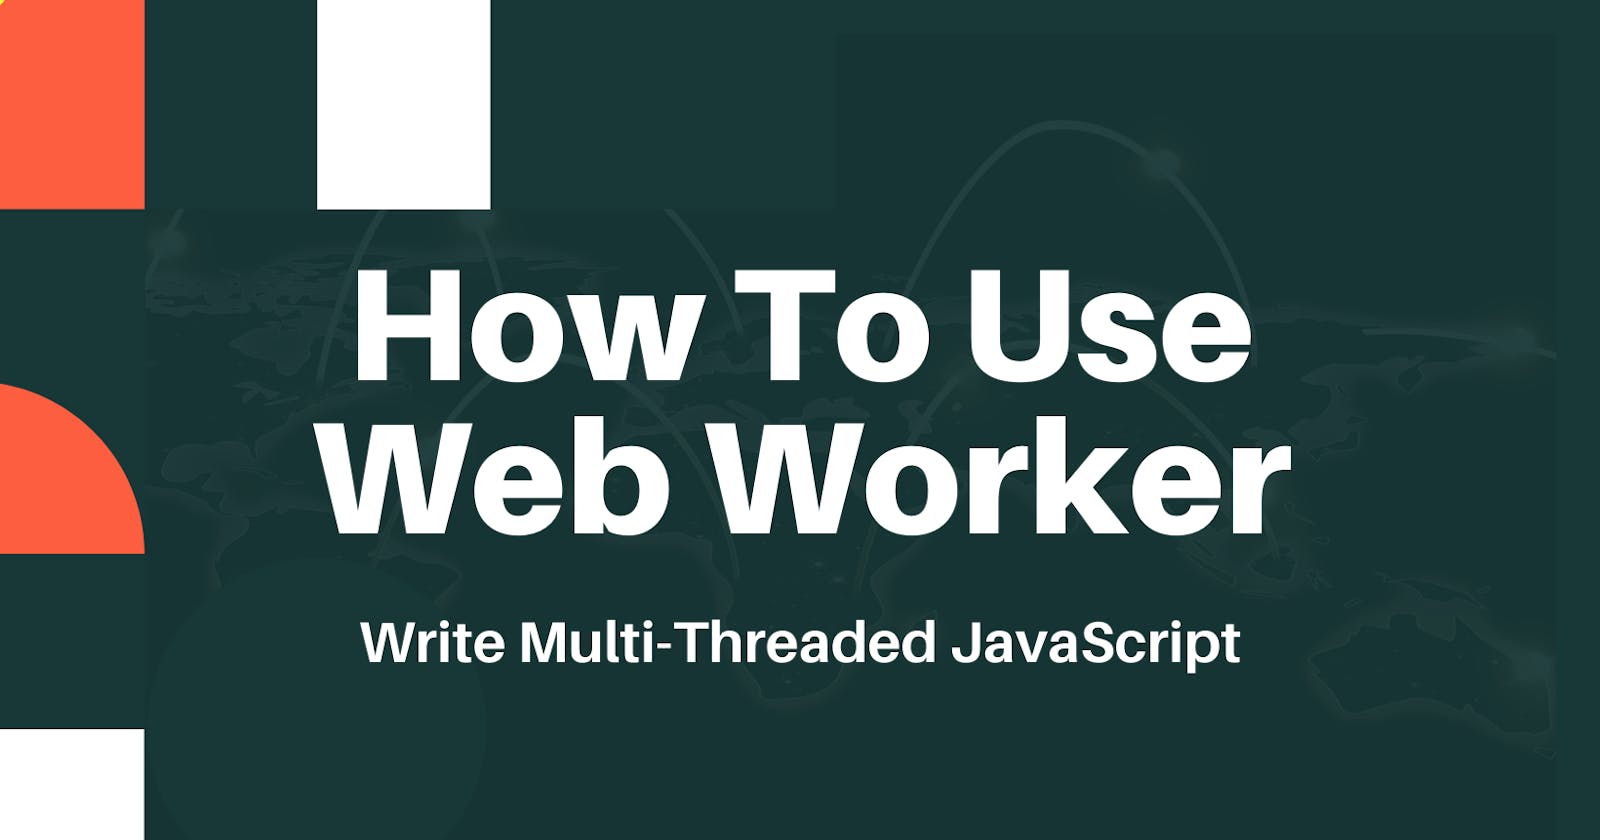 How To Use Web Worker